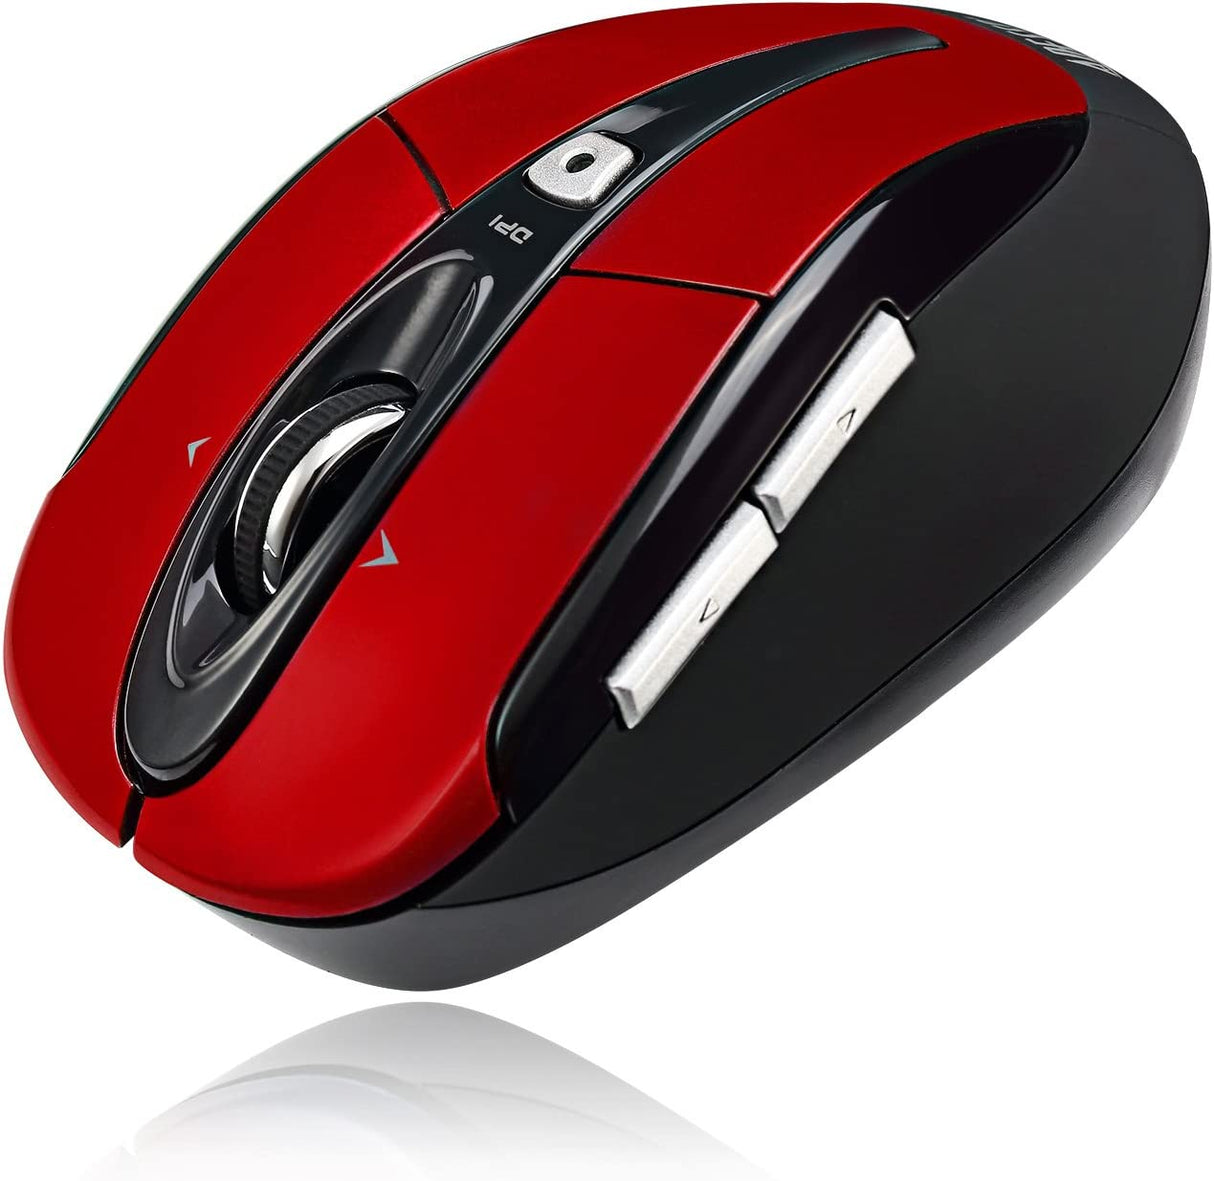 Adesso iMouse S60R iMouse S60 2.4 GHz Wireless Programmable Nano Mouse (Red) - Dealtargets.com